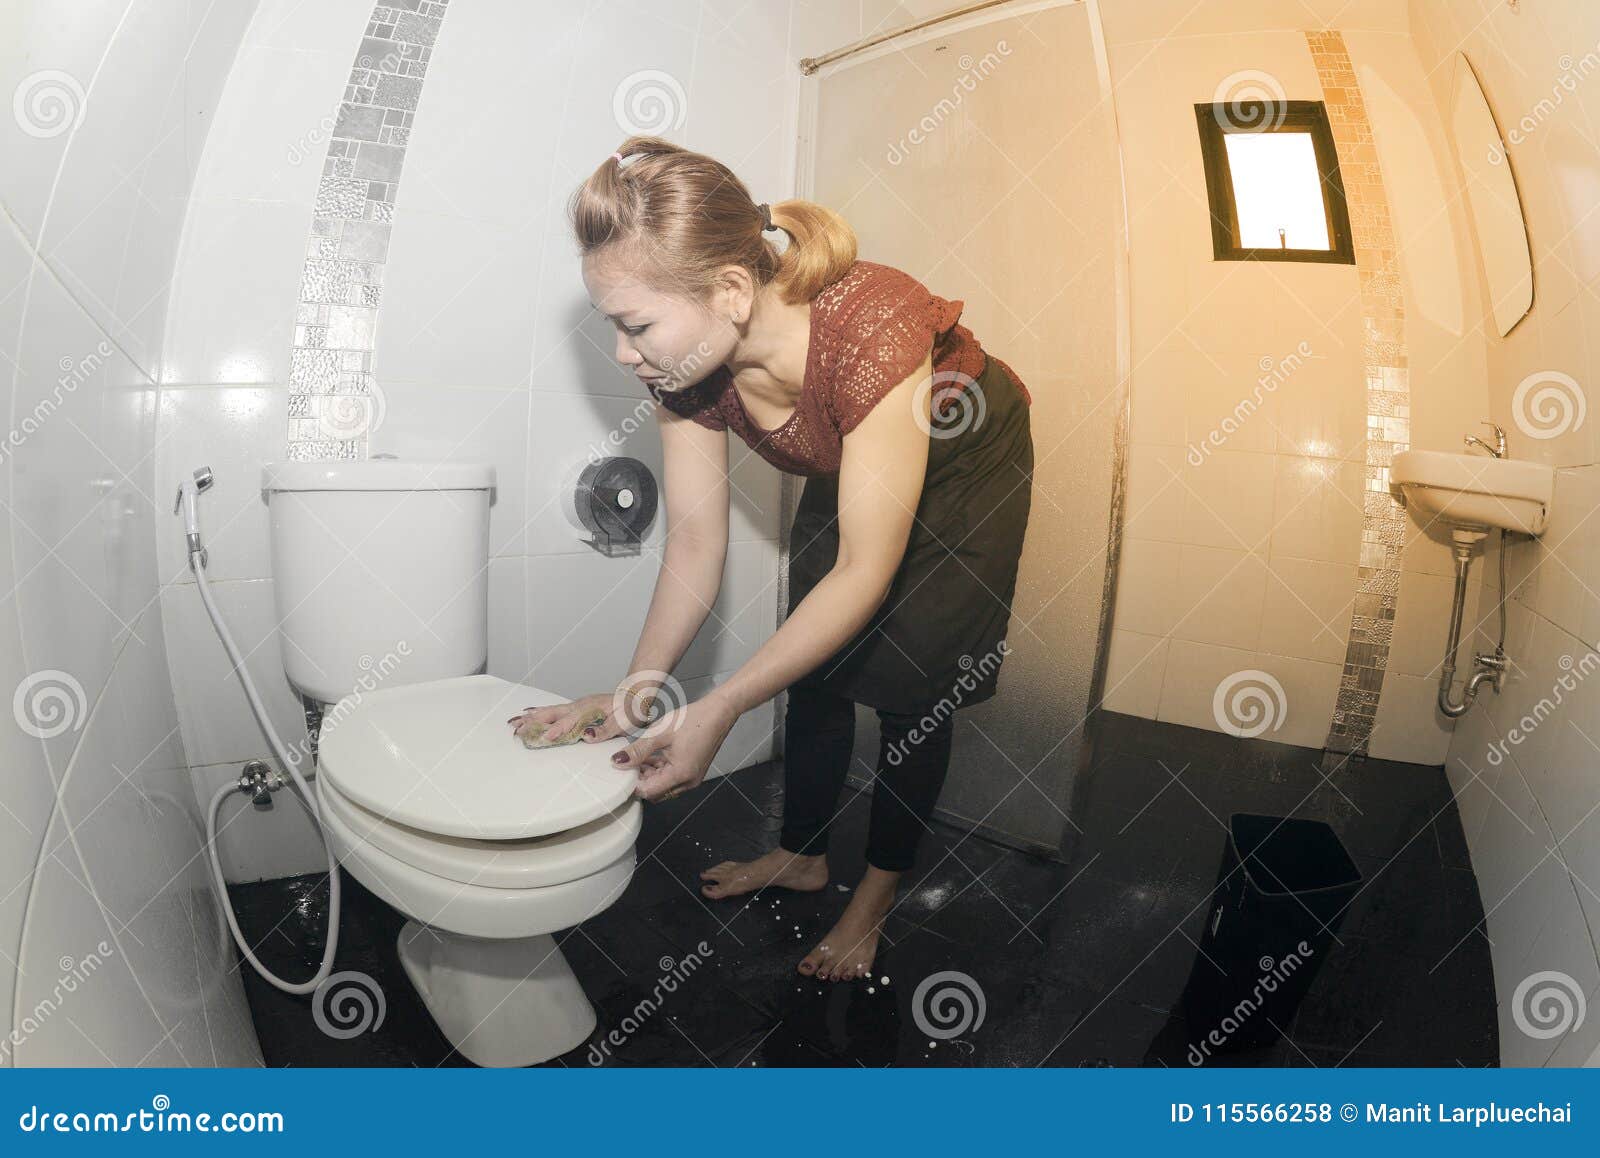 Cleaning Wiping Toilet Seat Stock Photo - Download Image 